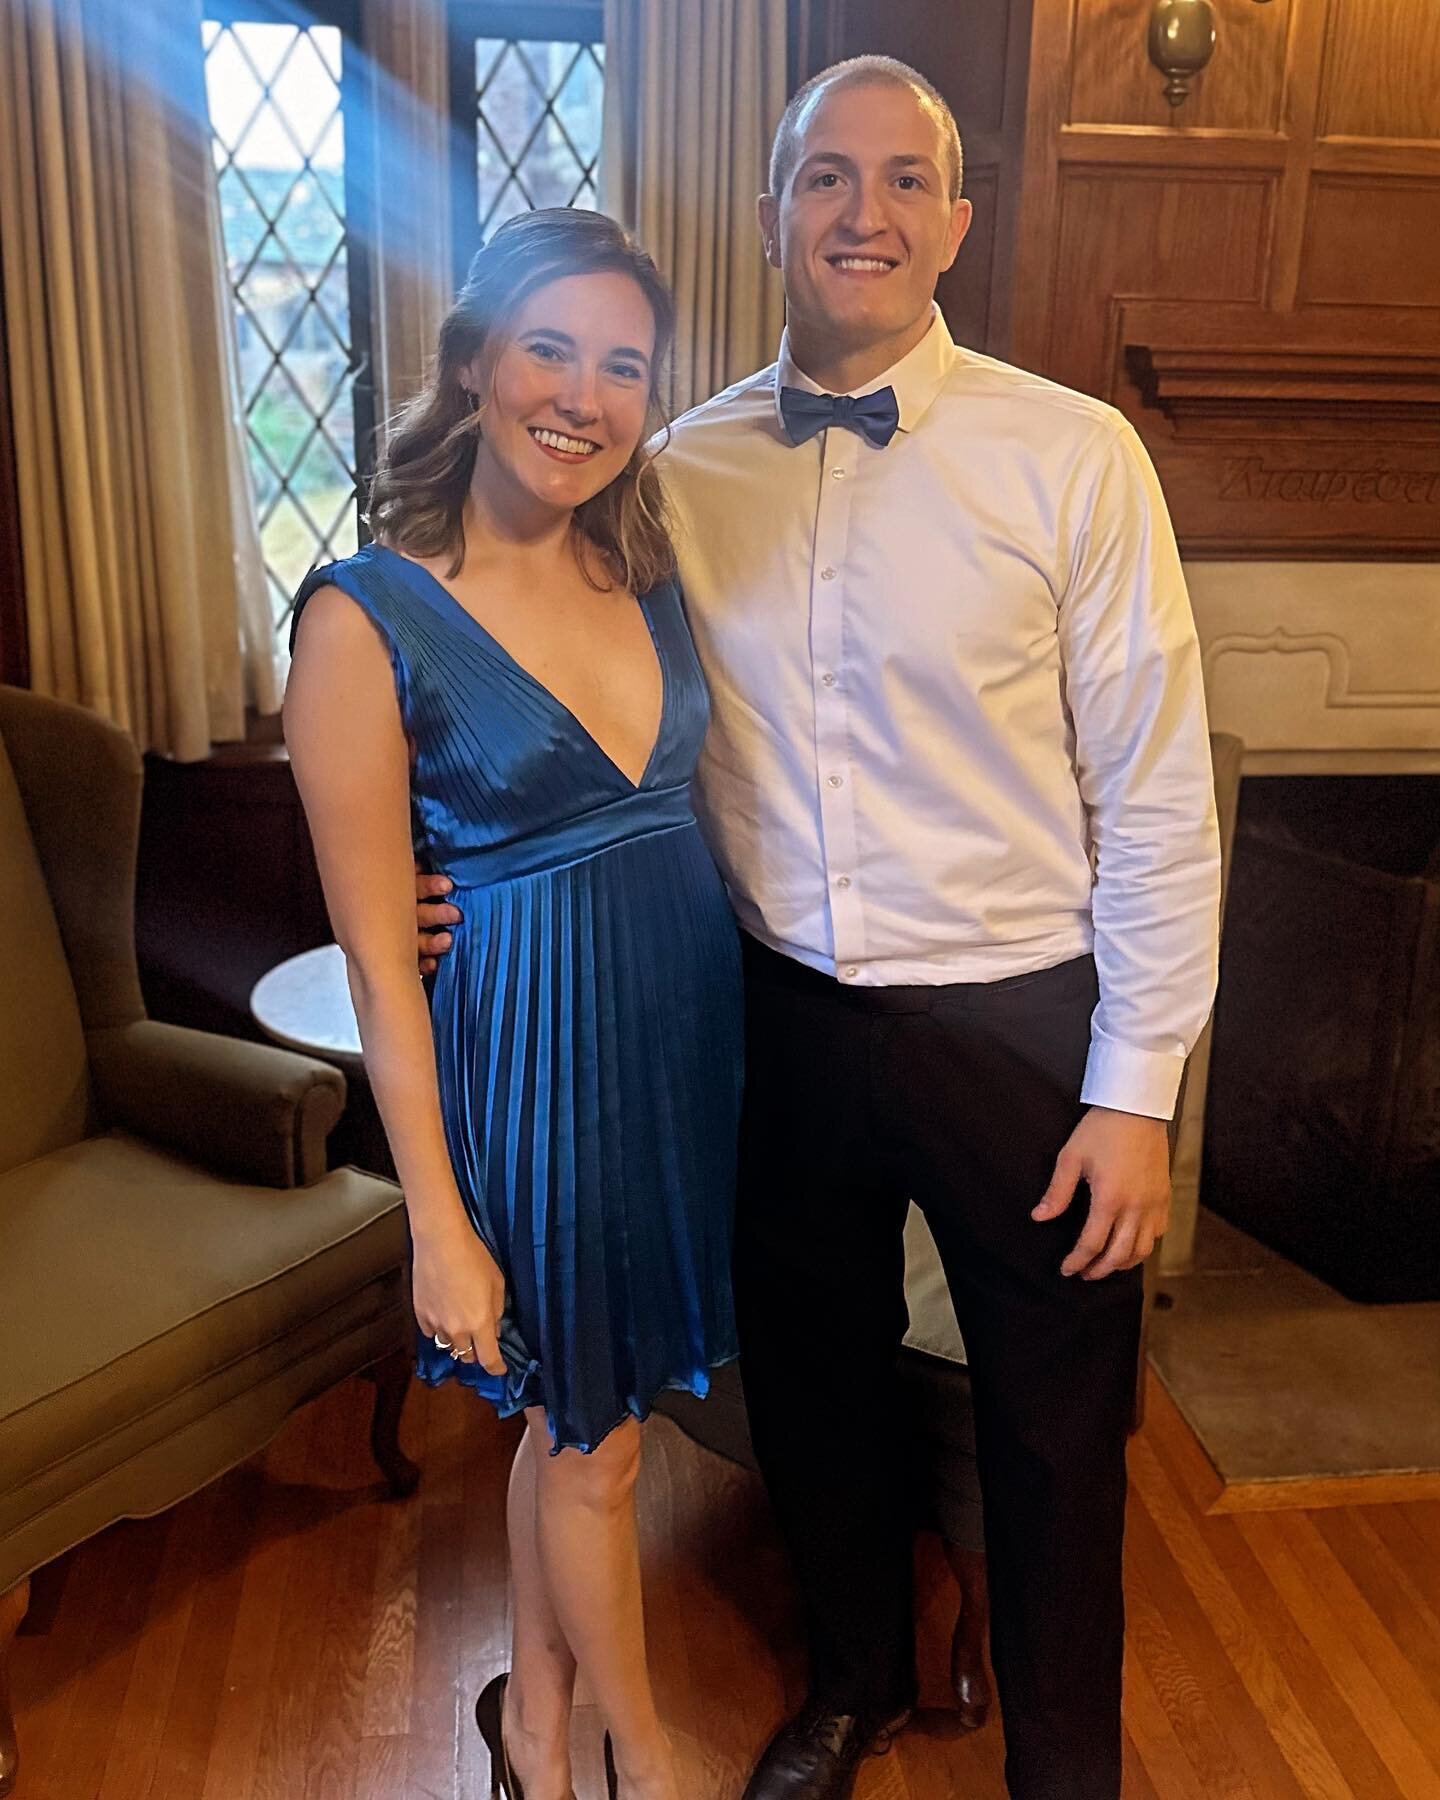 Being your best friend&rsquo;s +1 to a wedding should be a mandatory life experience. (Swipe to see the prom pics we never took &amp; an (almost) 10 year old throwback to make us all feel younger!!!!!) 💃 🕺 🪩